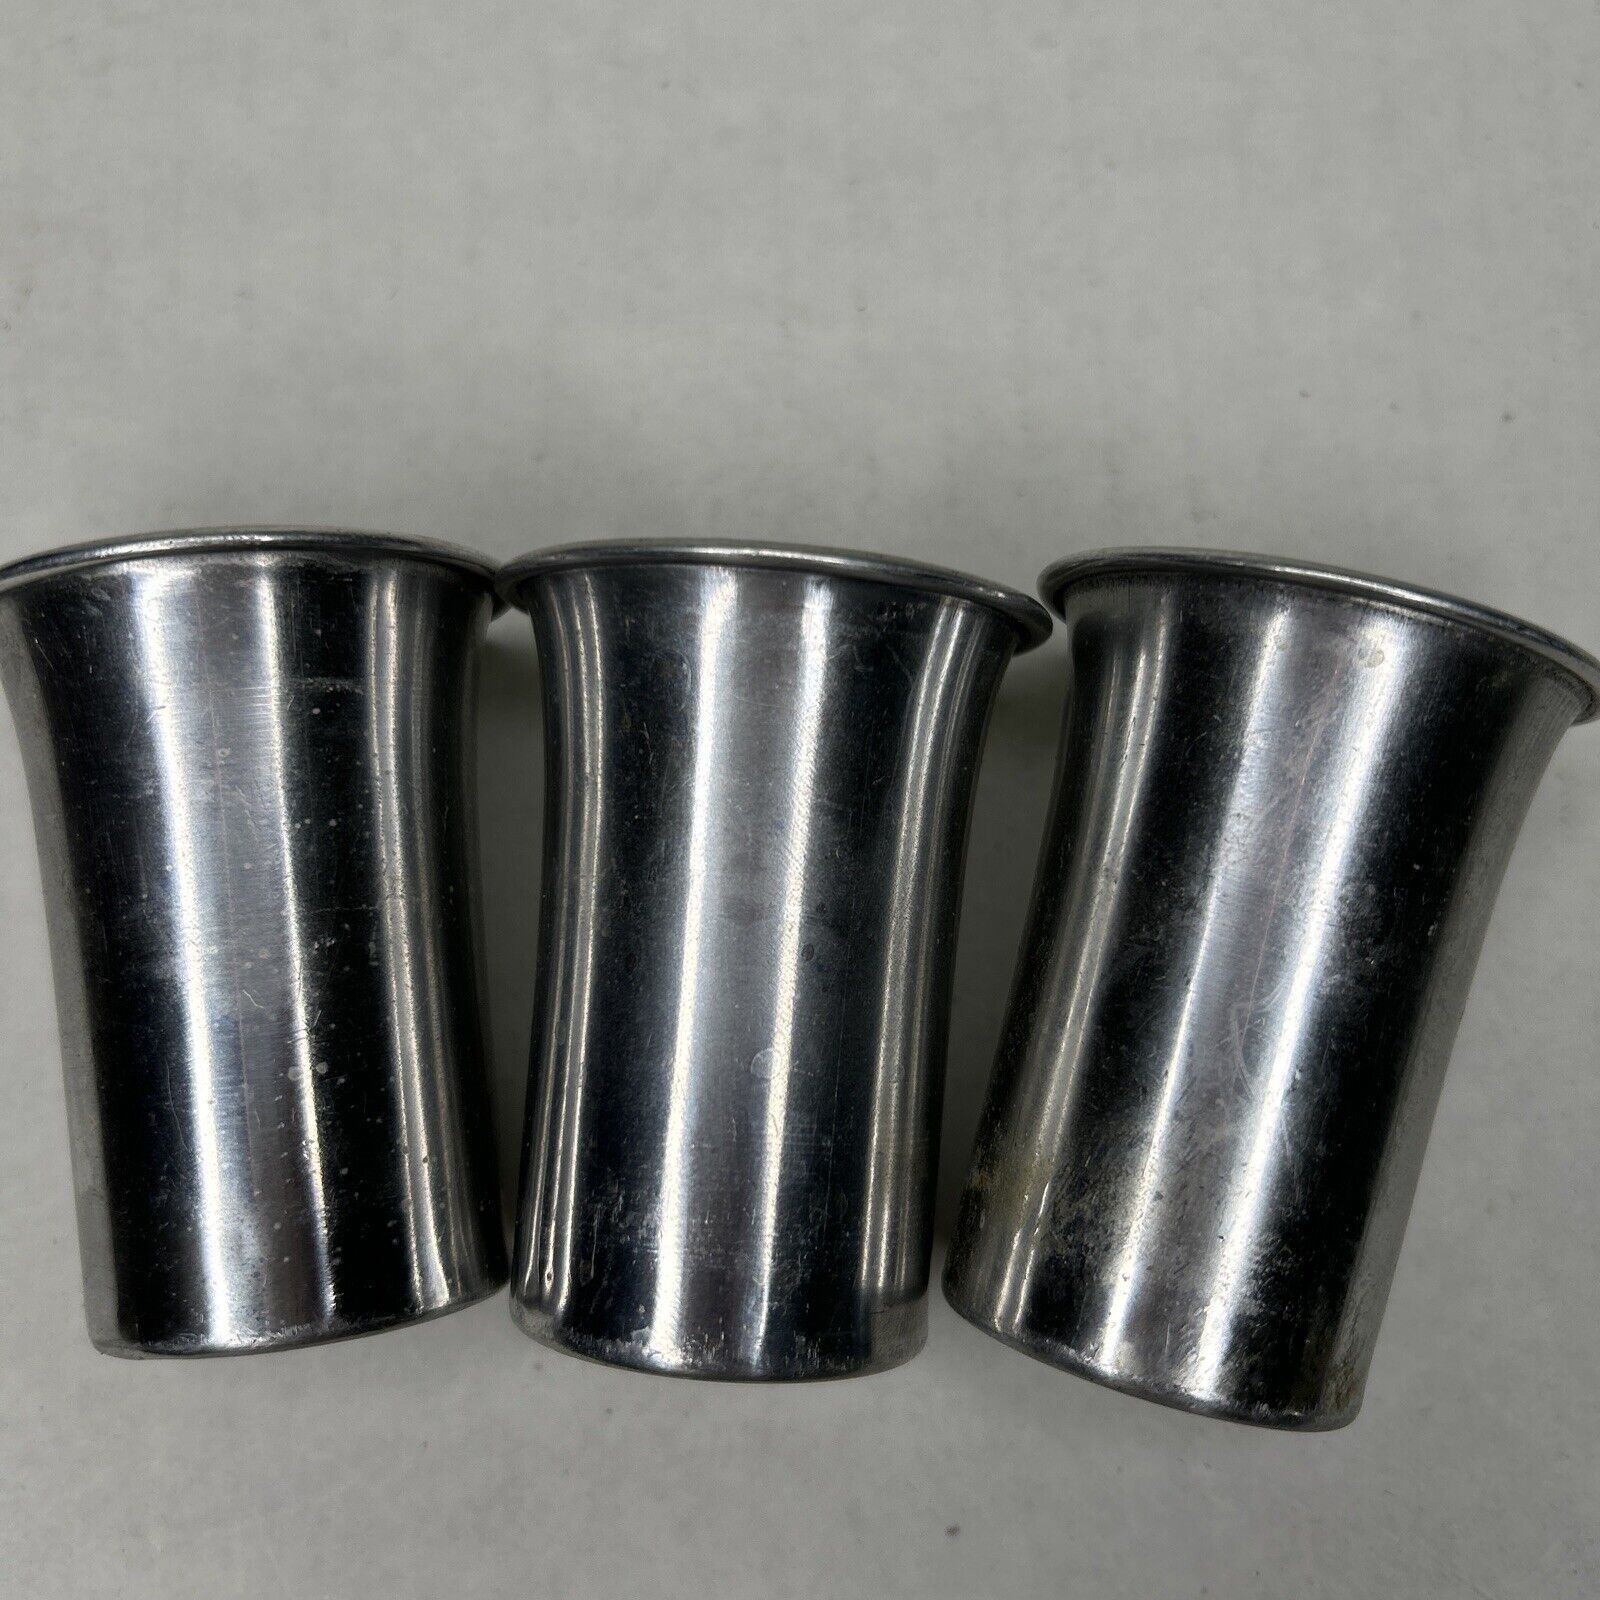 VINTAGE Shot Glass Tin METAL NESTING 3 CUPS FLAWED-heavy damage and wear